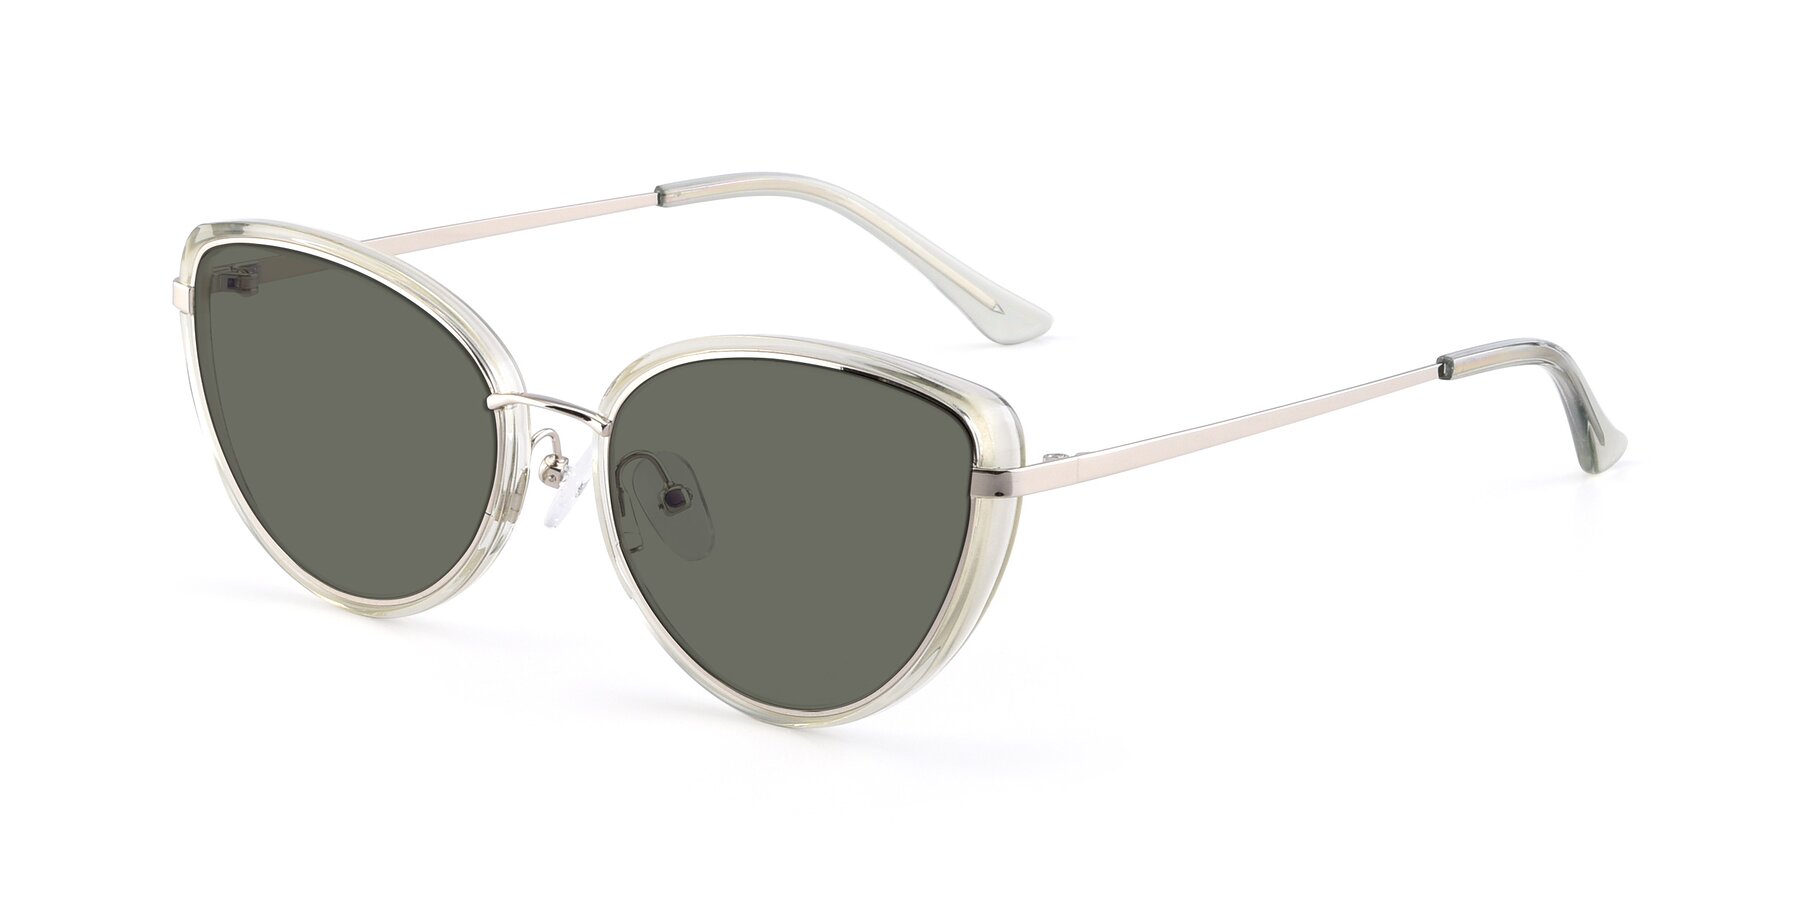 Angle of 17706 in Transparent Green-Silver with Gray Polarized Lenses